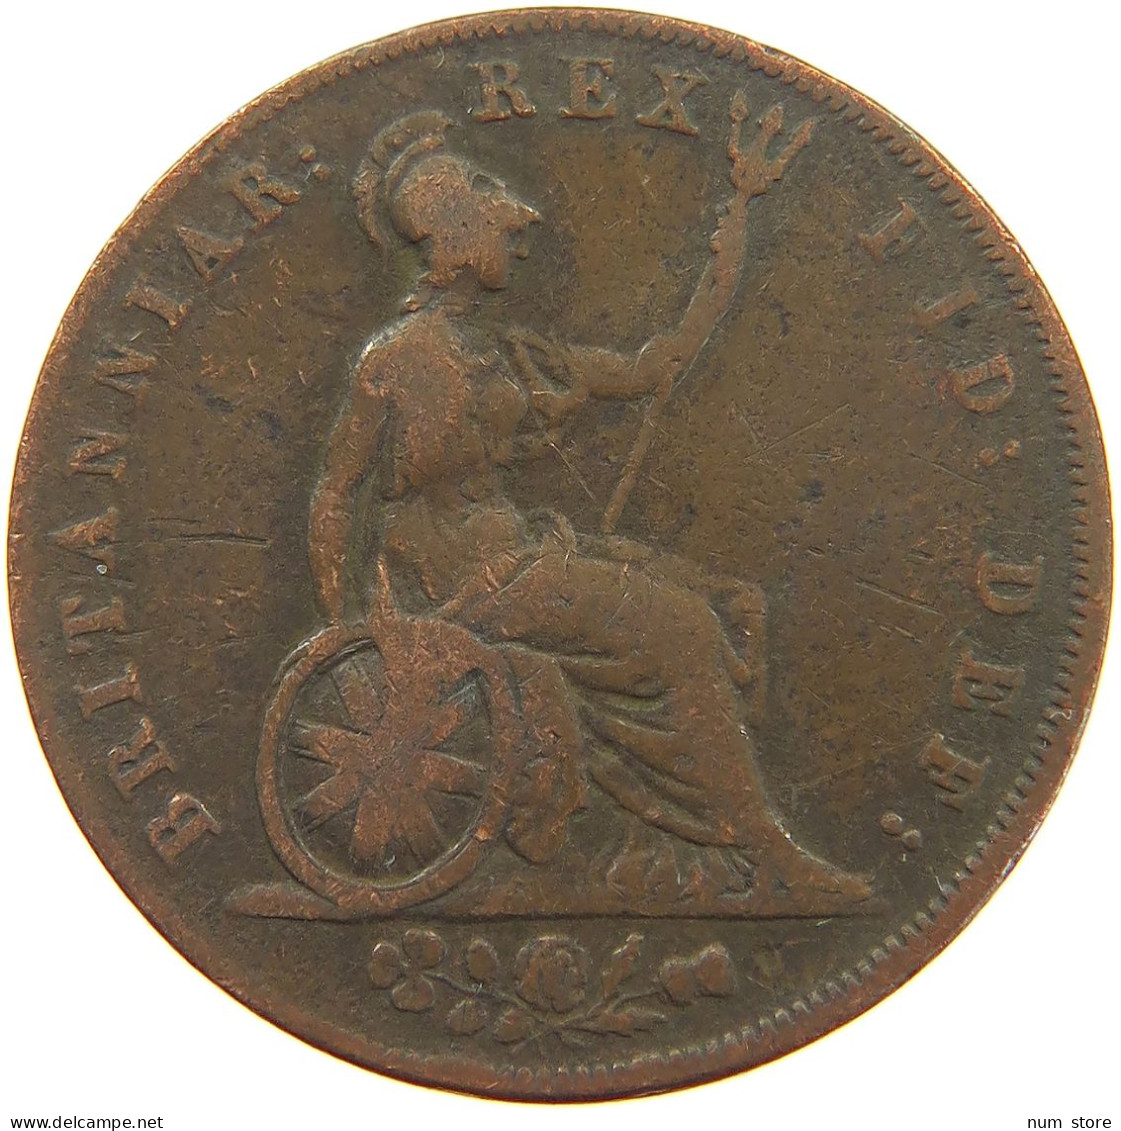 GREAT BRITAIN HALFPENNY 1827 GEORGE IV. (1820-1830) #a084 0191 - C. 1/2 Penny